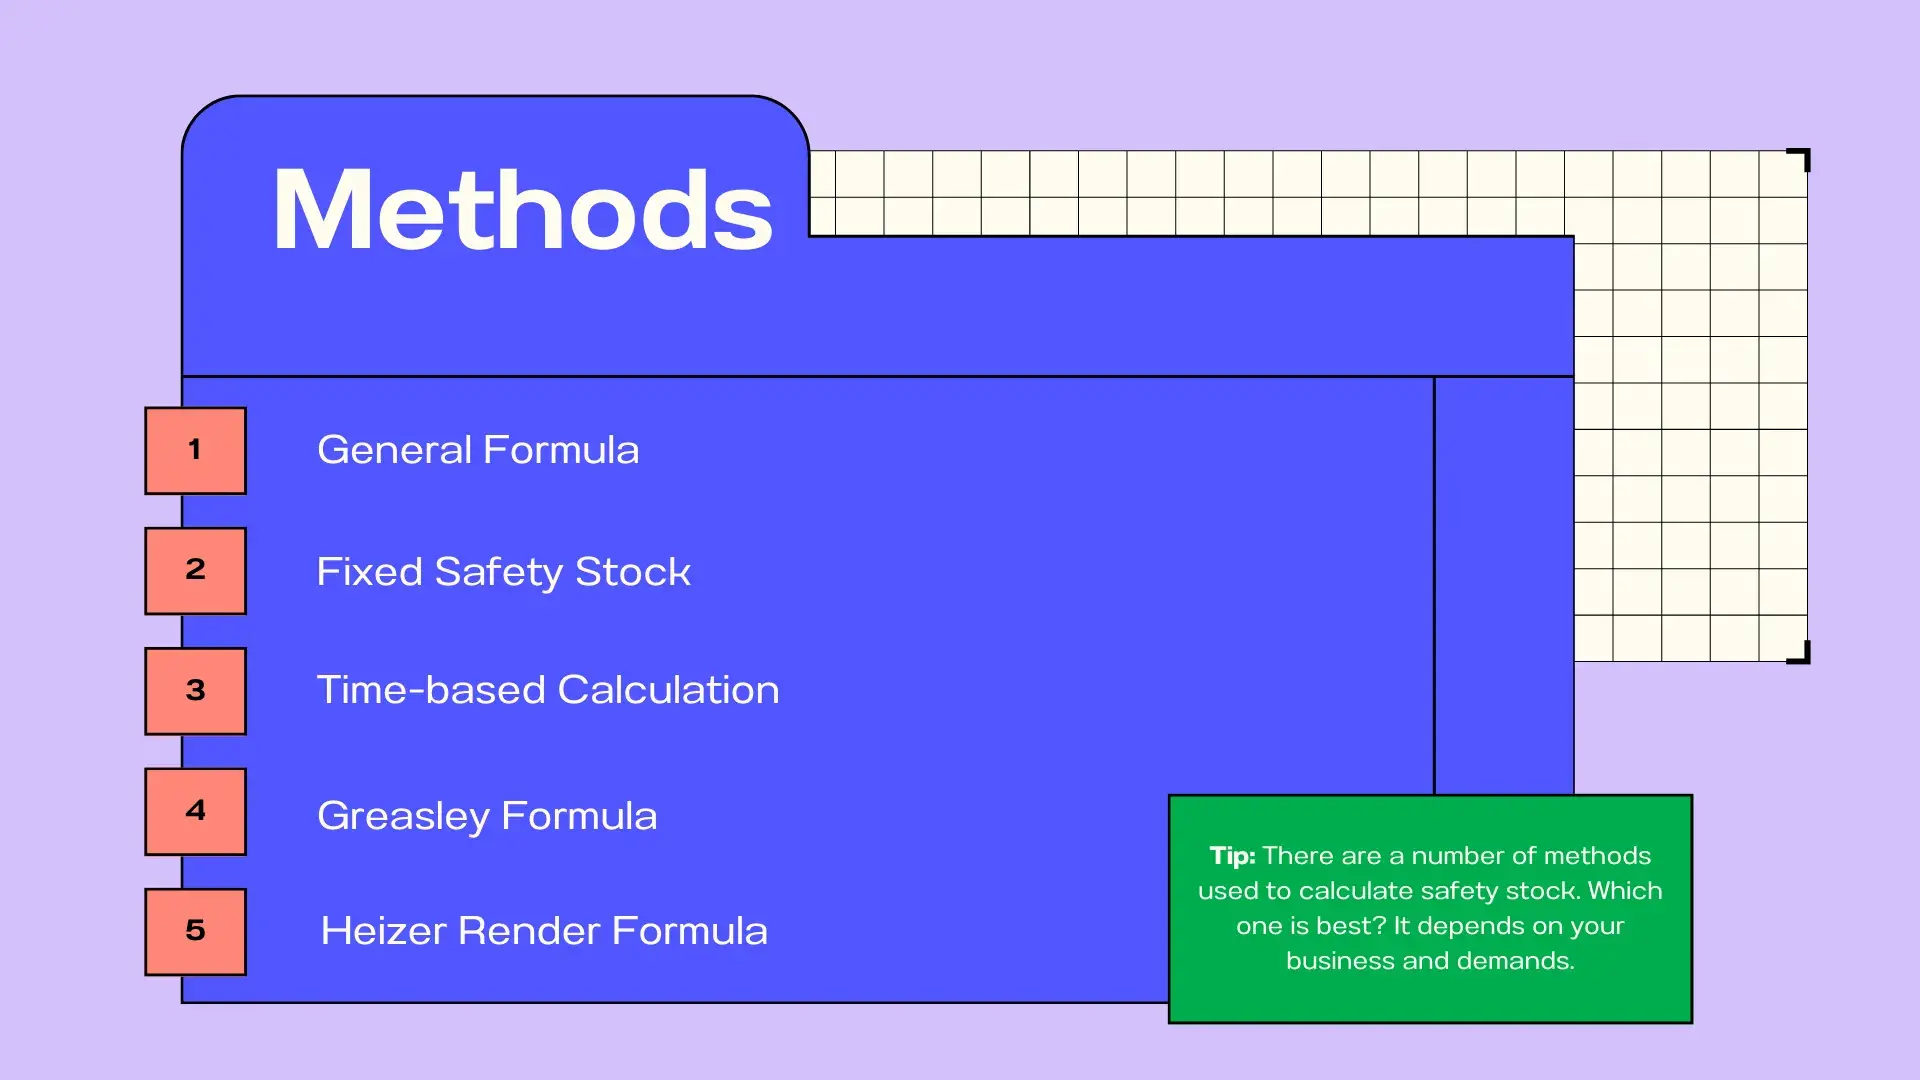 Methods for calculating safety stock